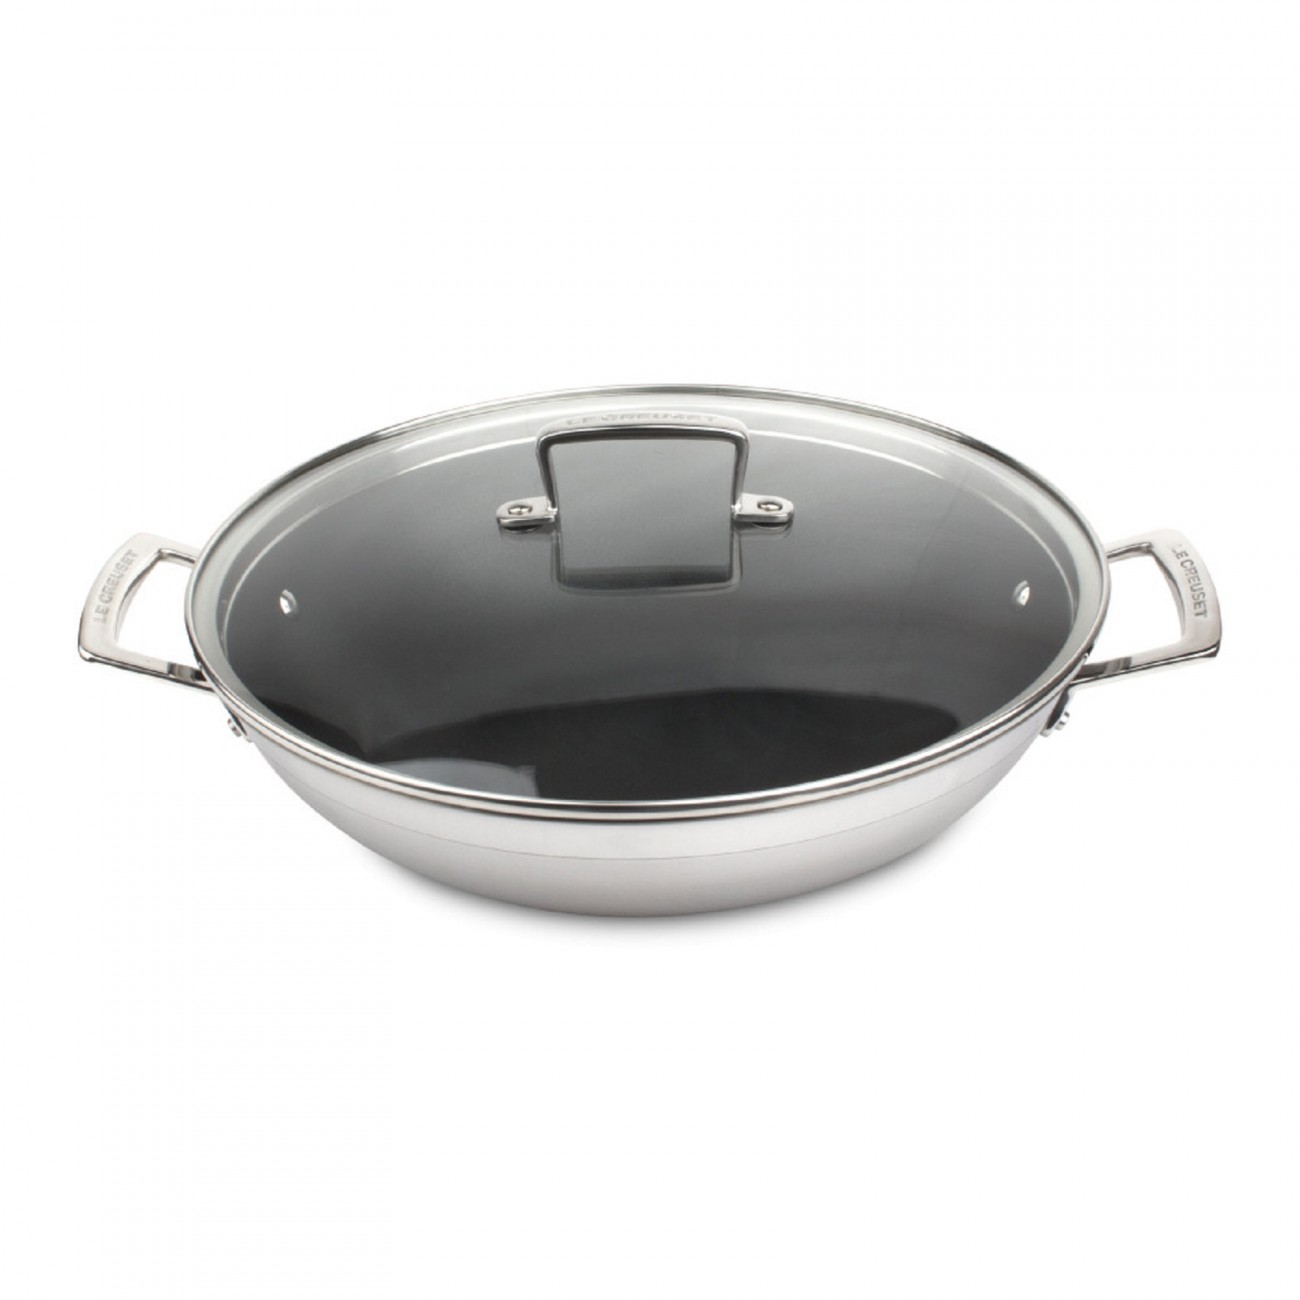 Non-Stick Dutch Oven Pot with Glass Lid (light marble)